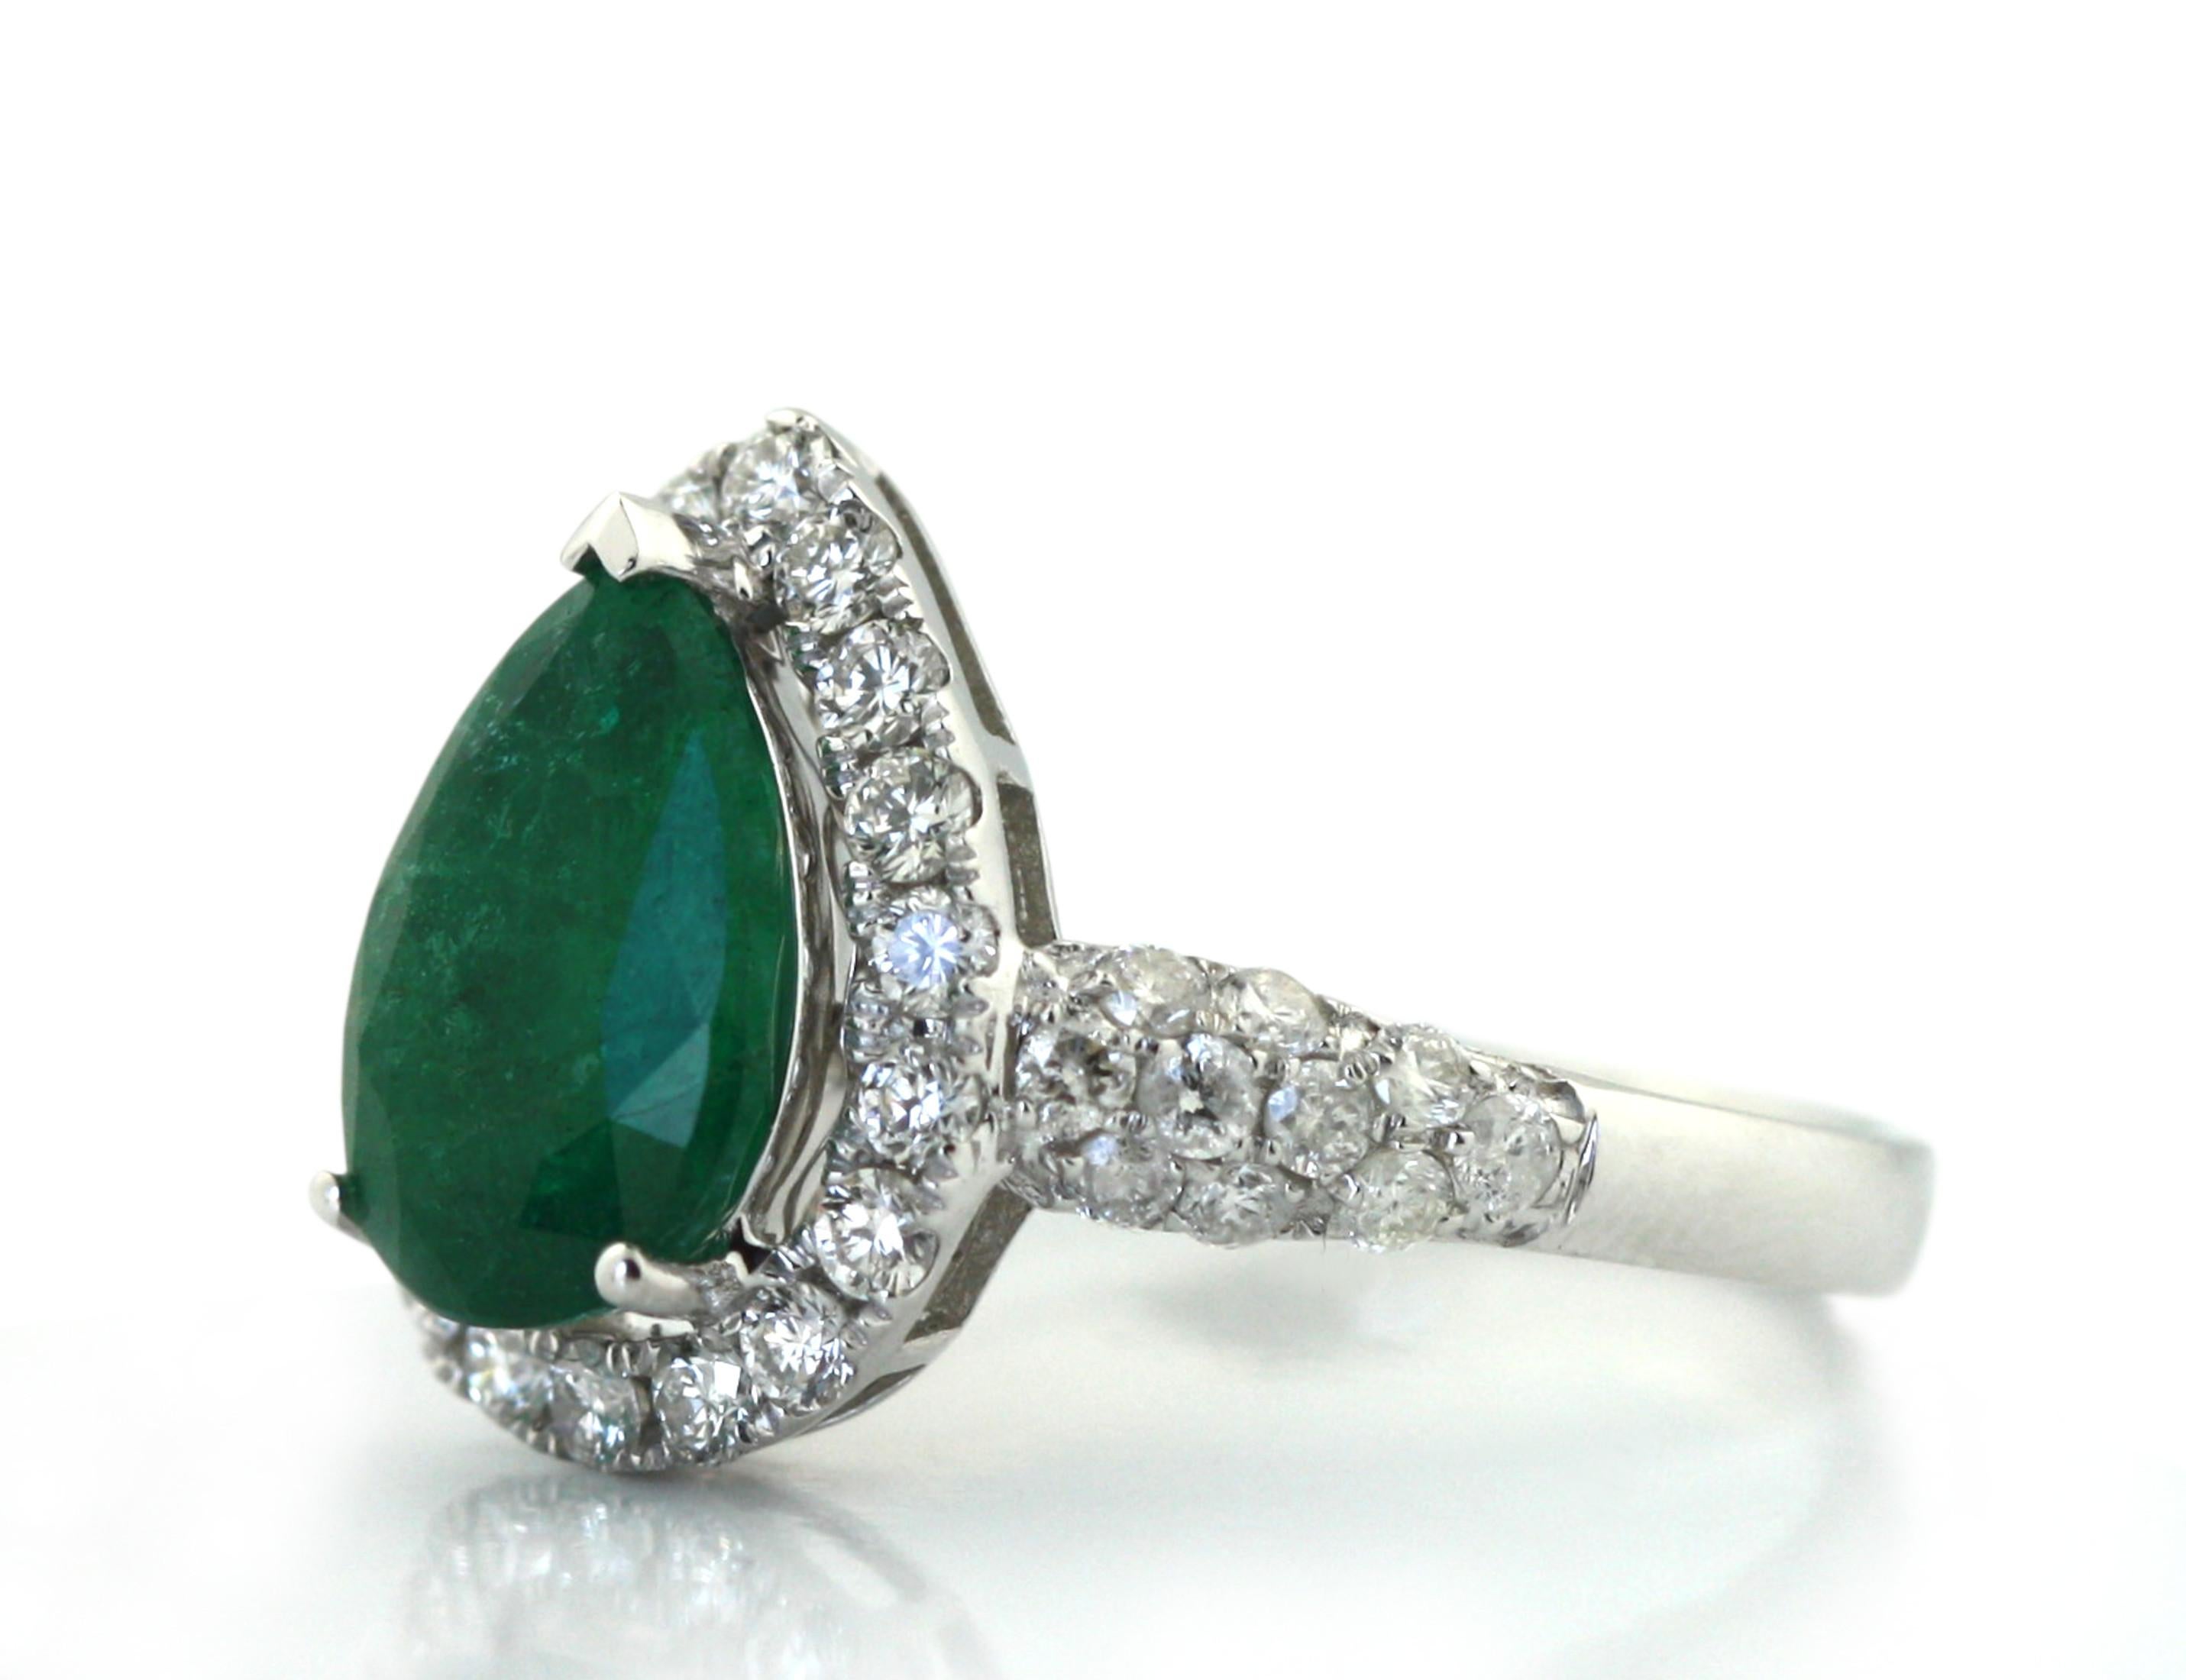 
18KT Emerald and Diamond Ring 
Set with a pear shaped, natural emerald 
Weighing approximately 2.20 carats 
within a surround of thirty-eight round, brilliant-cut diamonds
weighing approximately 0.83 carats 
gross weight approx. 4.10 grams 
size 7.